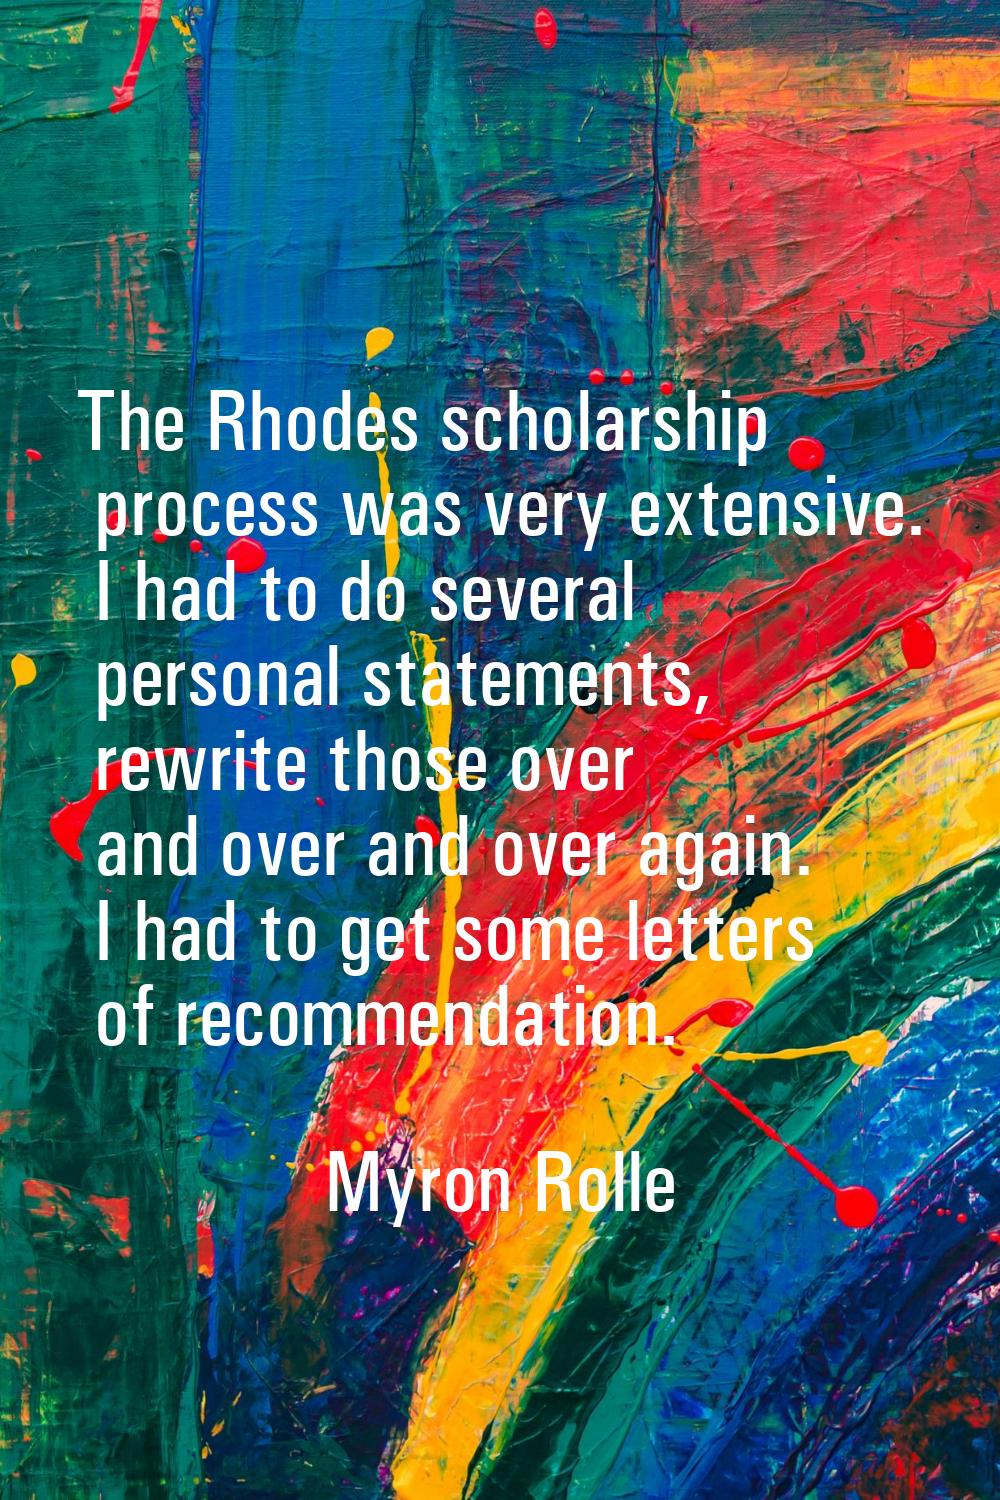 The Rhodes scholarship process was very extensive. I had to do several personal statements, rewrite